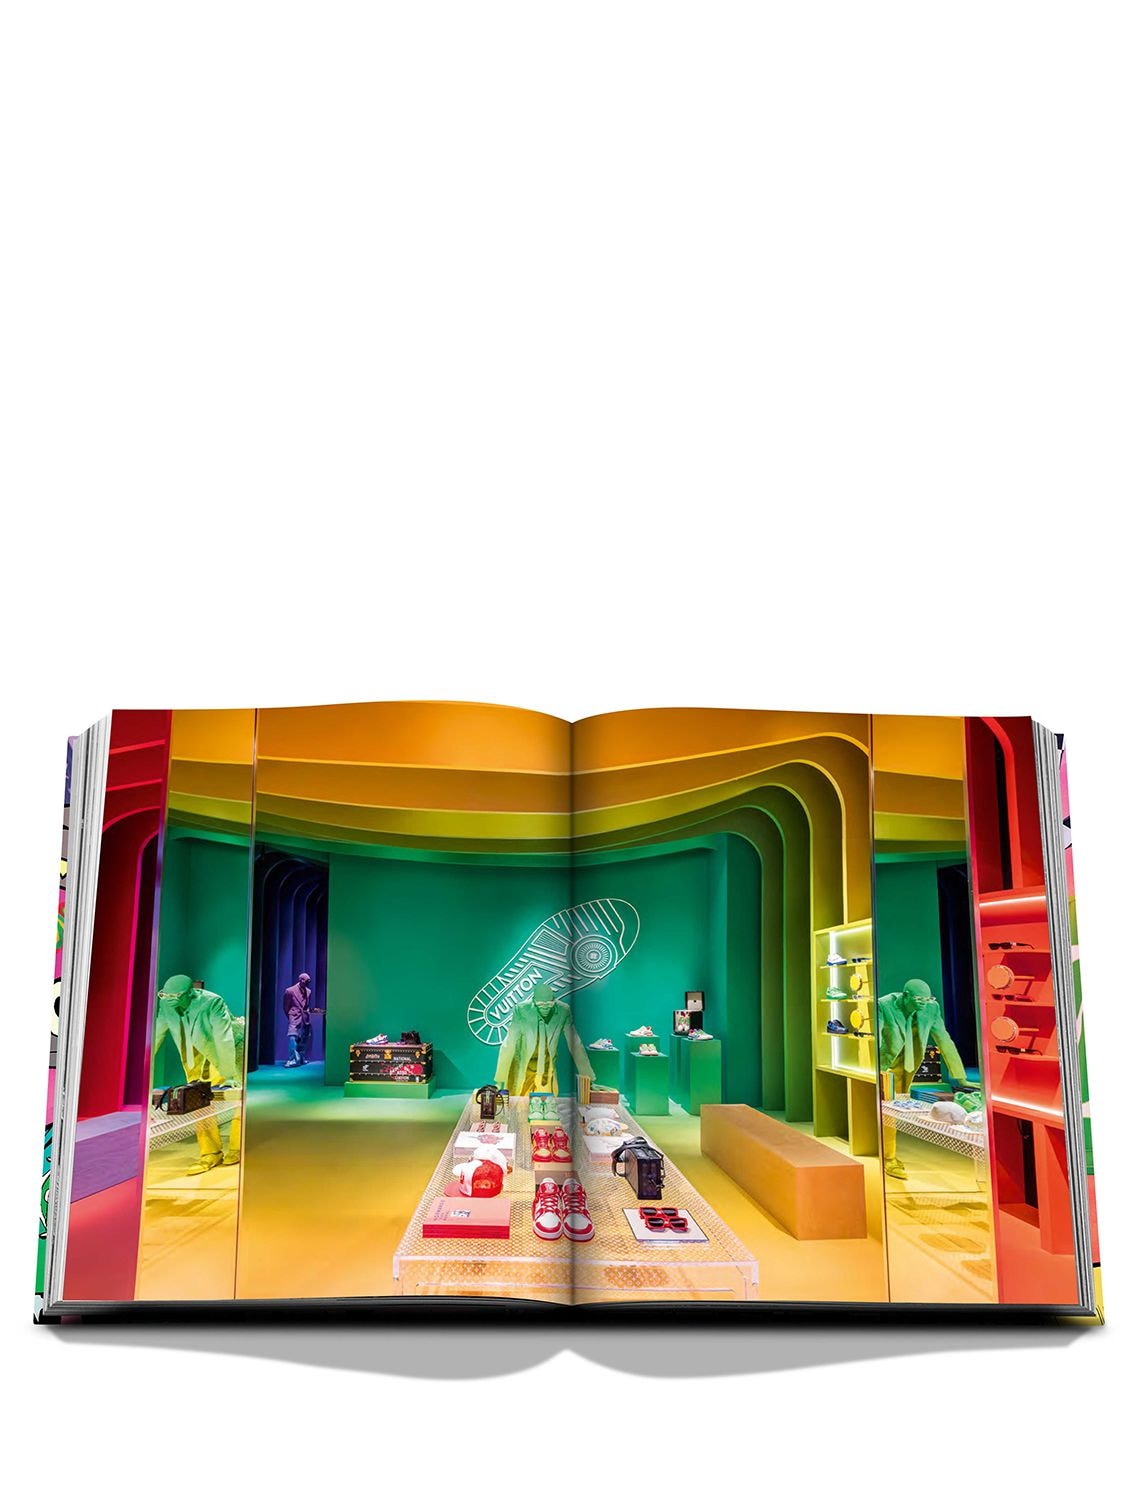 Louis Vuitton: Vrigil Abloh Book Collection, The wait is over: The Louis  Vuitton: Virgil Abloh book collection is here. These three limited-edition,  collectible hardcovers celebrate the, By ASSOULINE